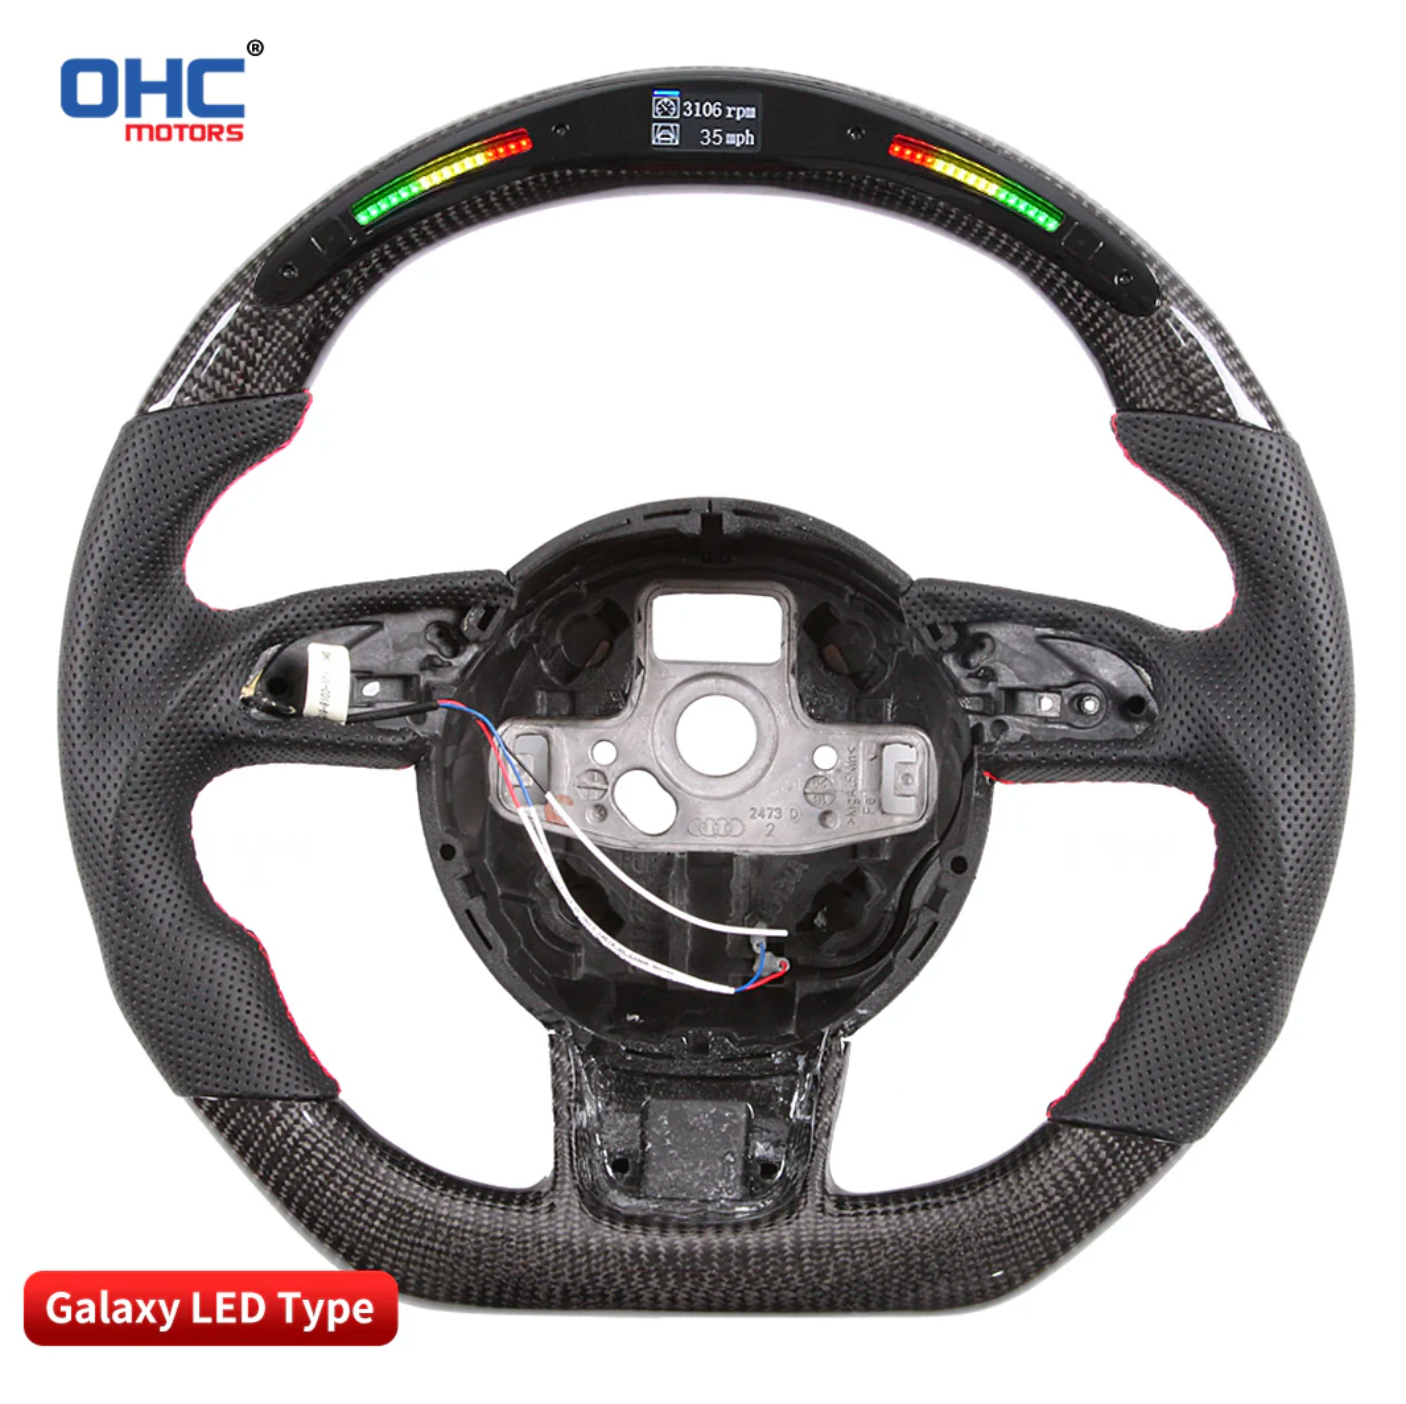 Audi A1 & S1 Carbon Fibre & Galaxy LED Steering Wheel by OHC (2014-2018)